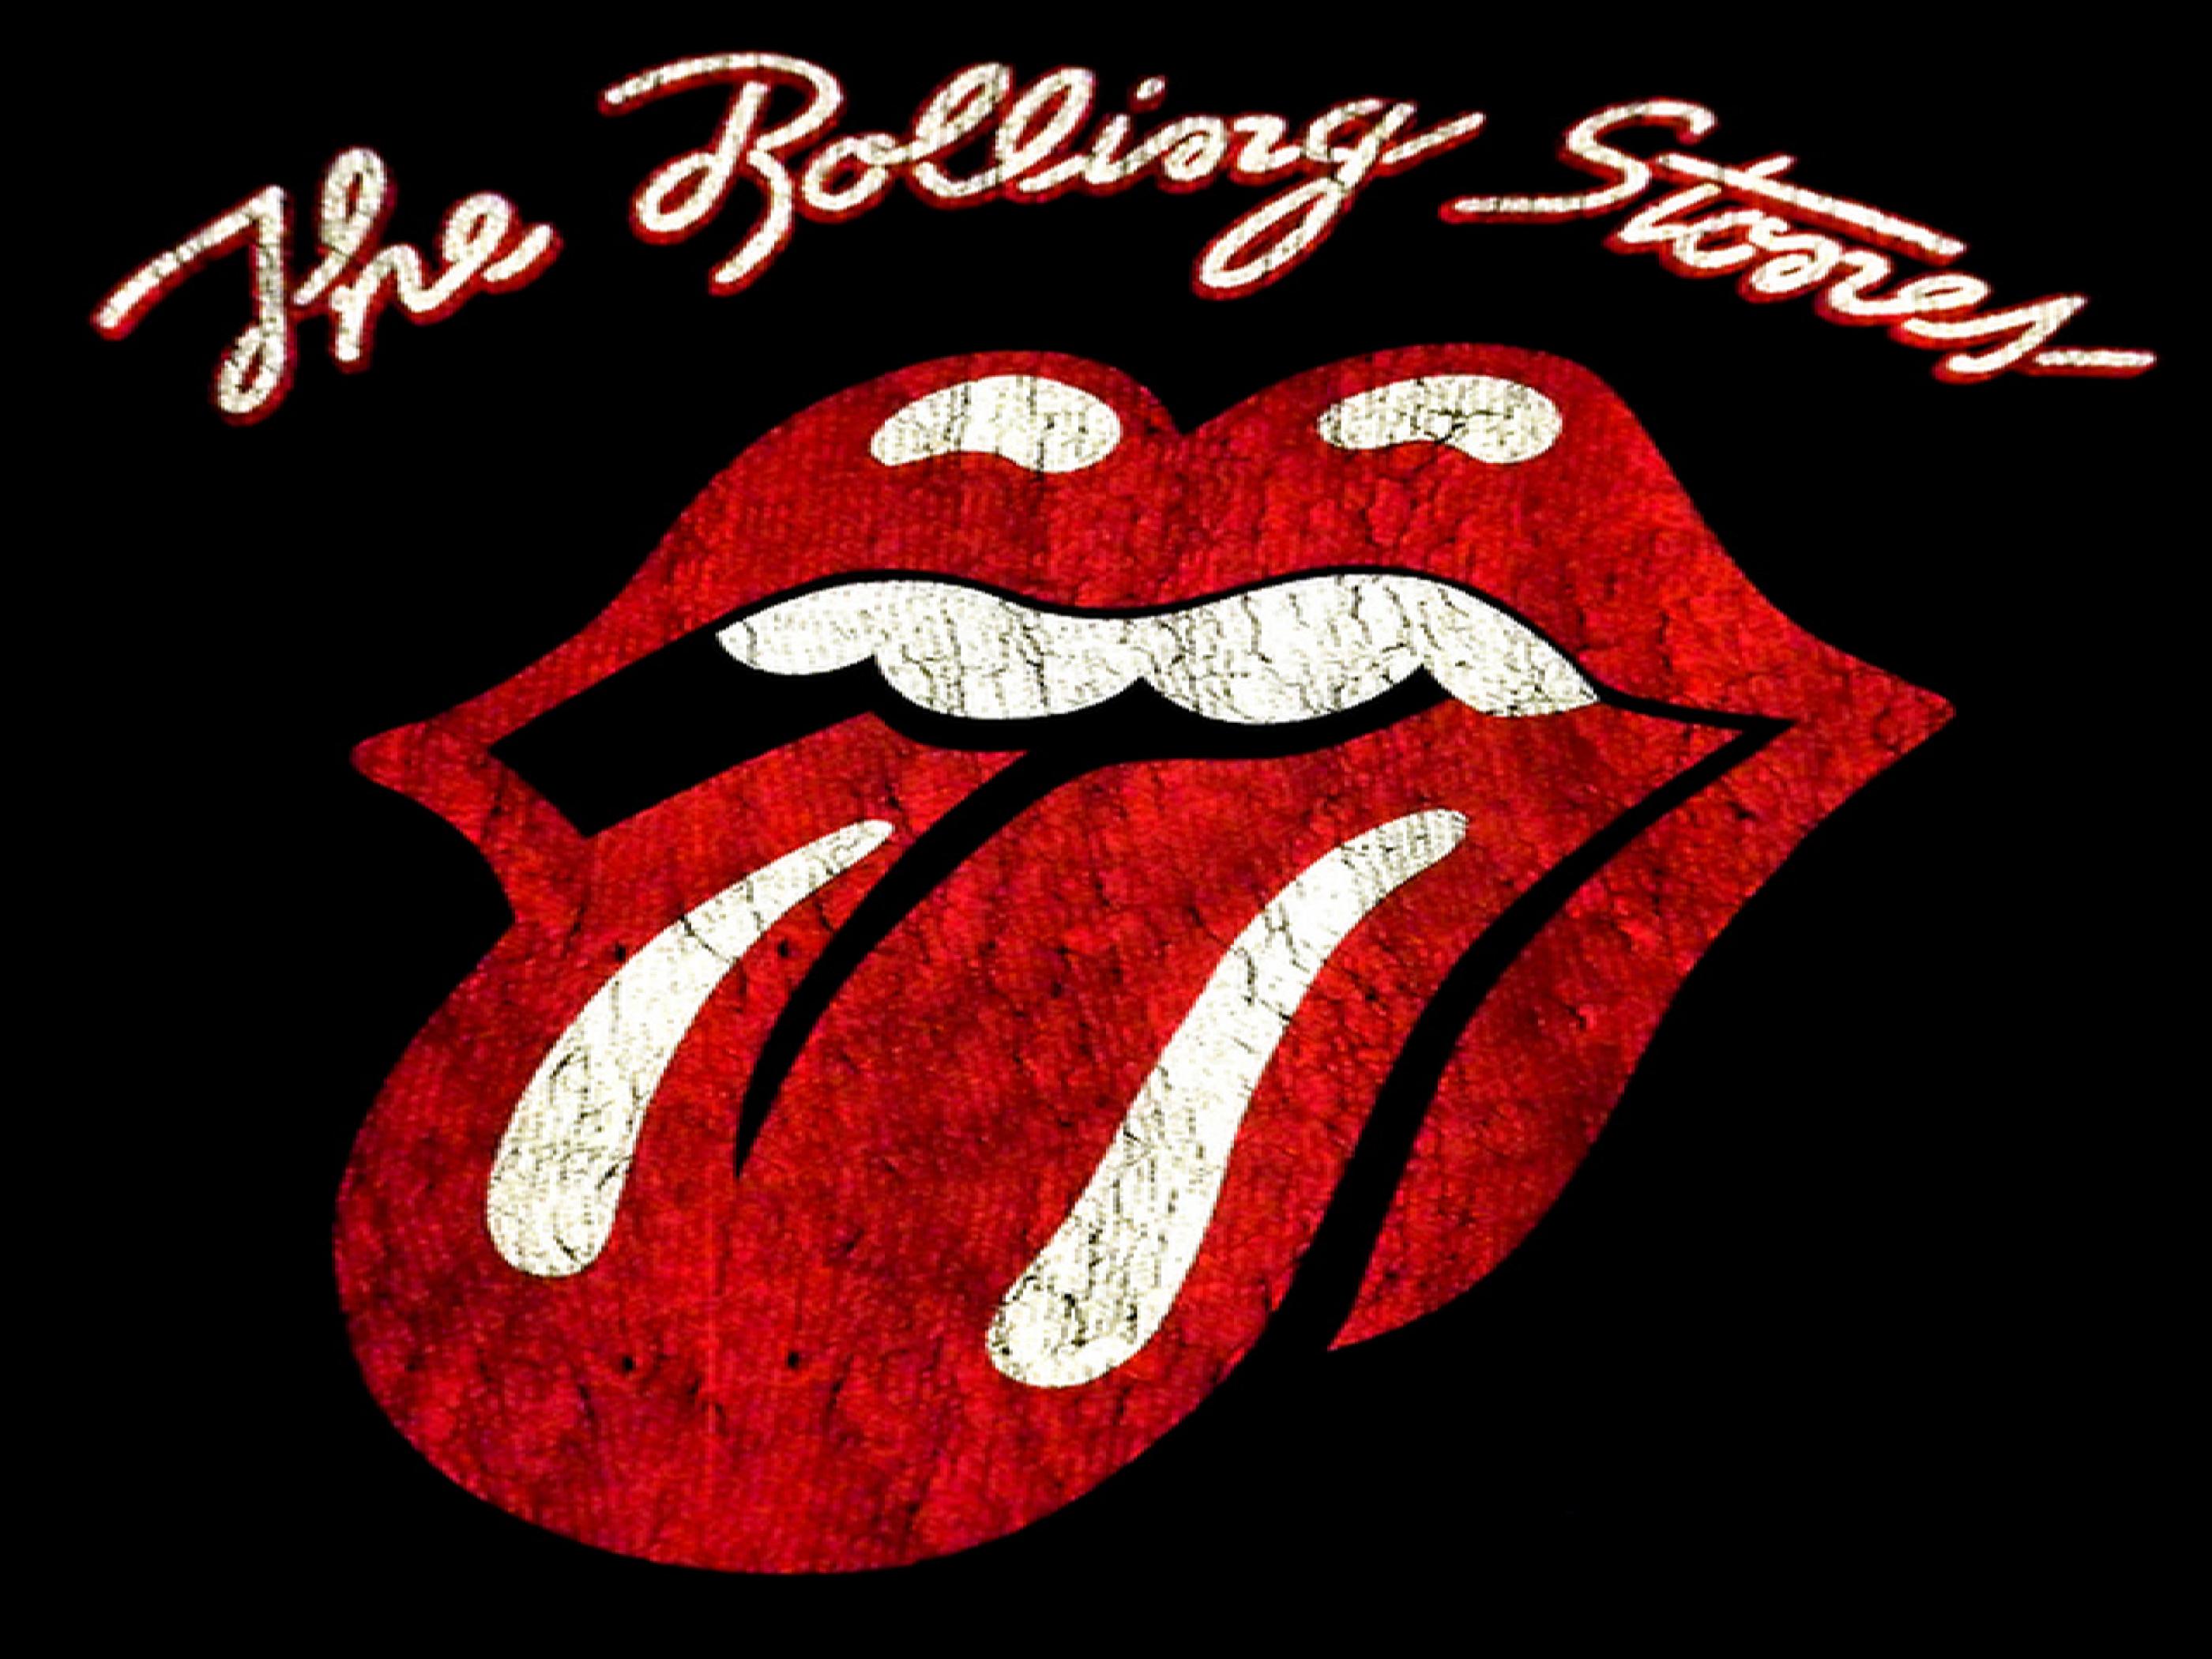 Wallpaper ID 449468  Music The Rolling Stones Phone Wallpaper  720x1280  free download